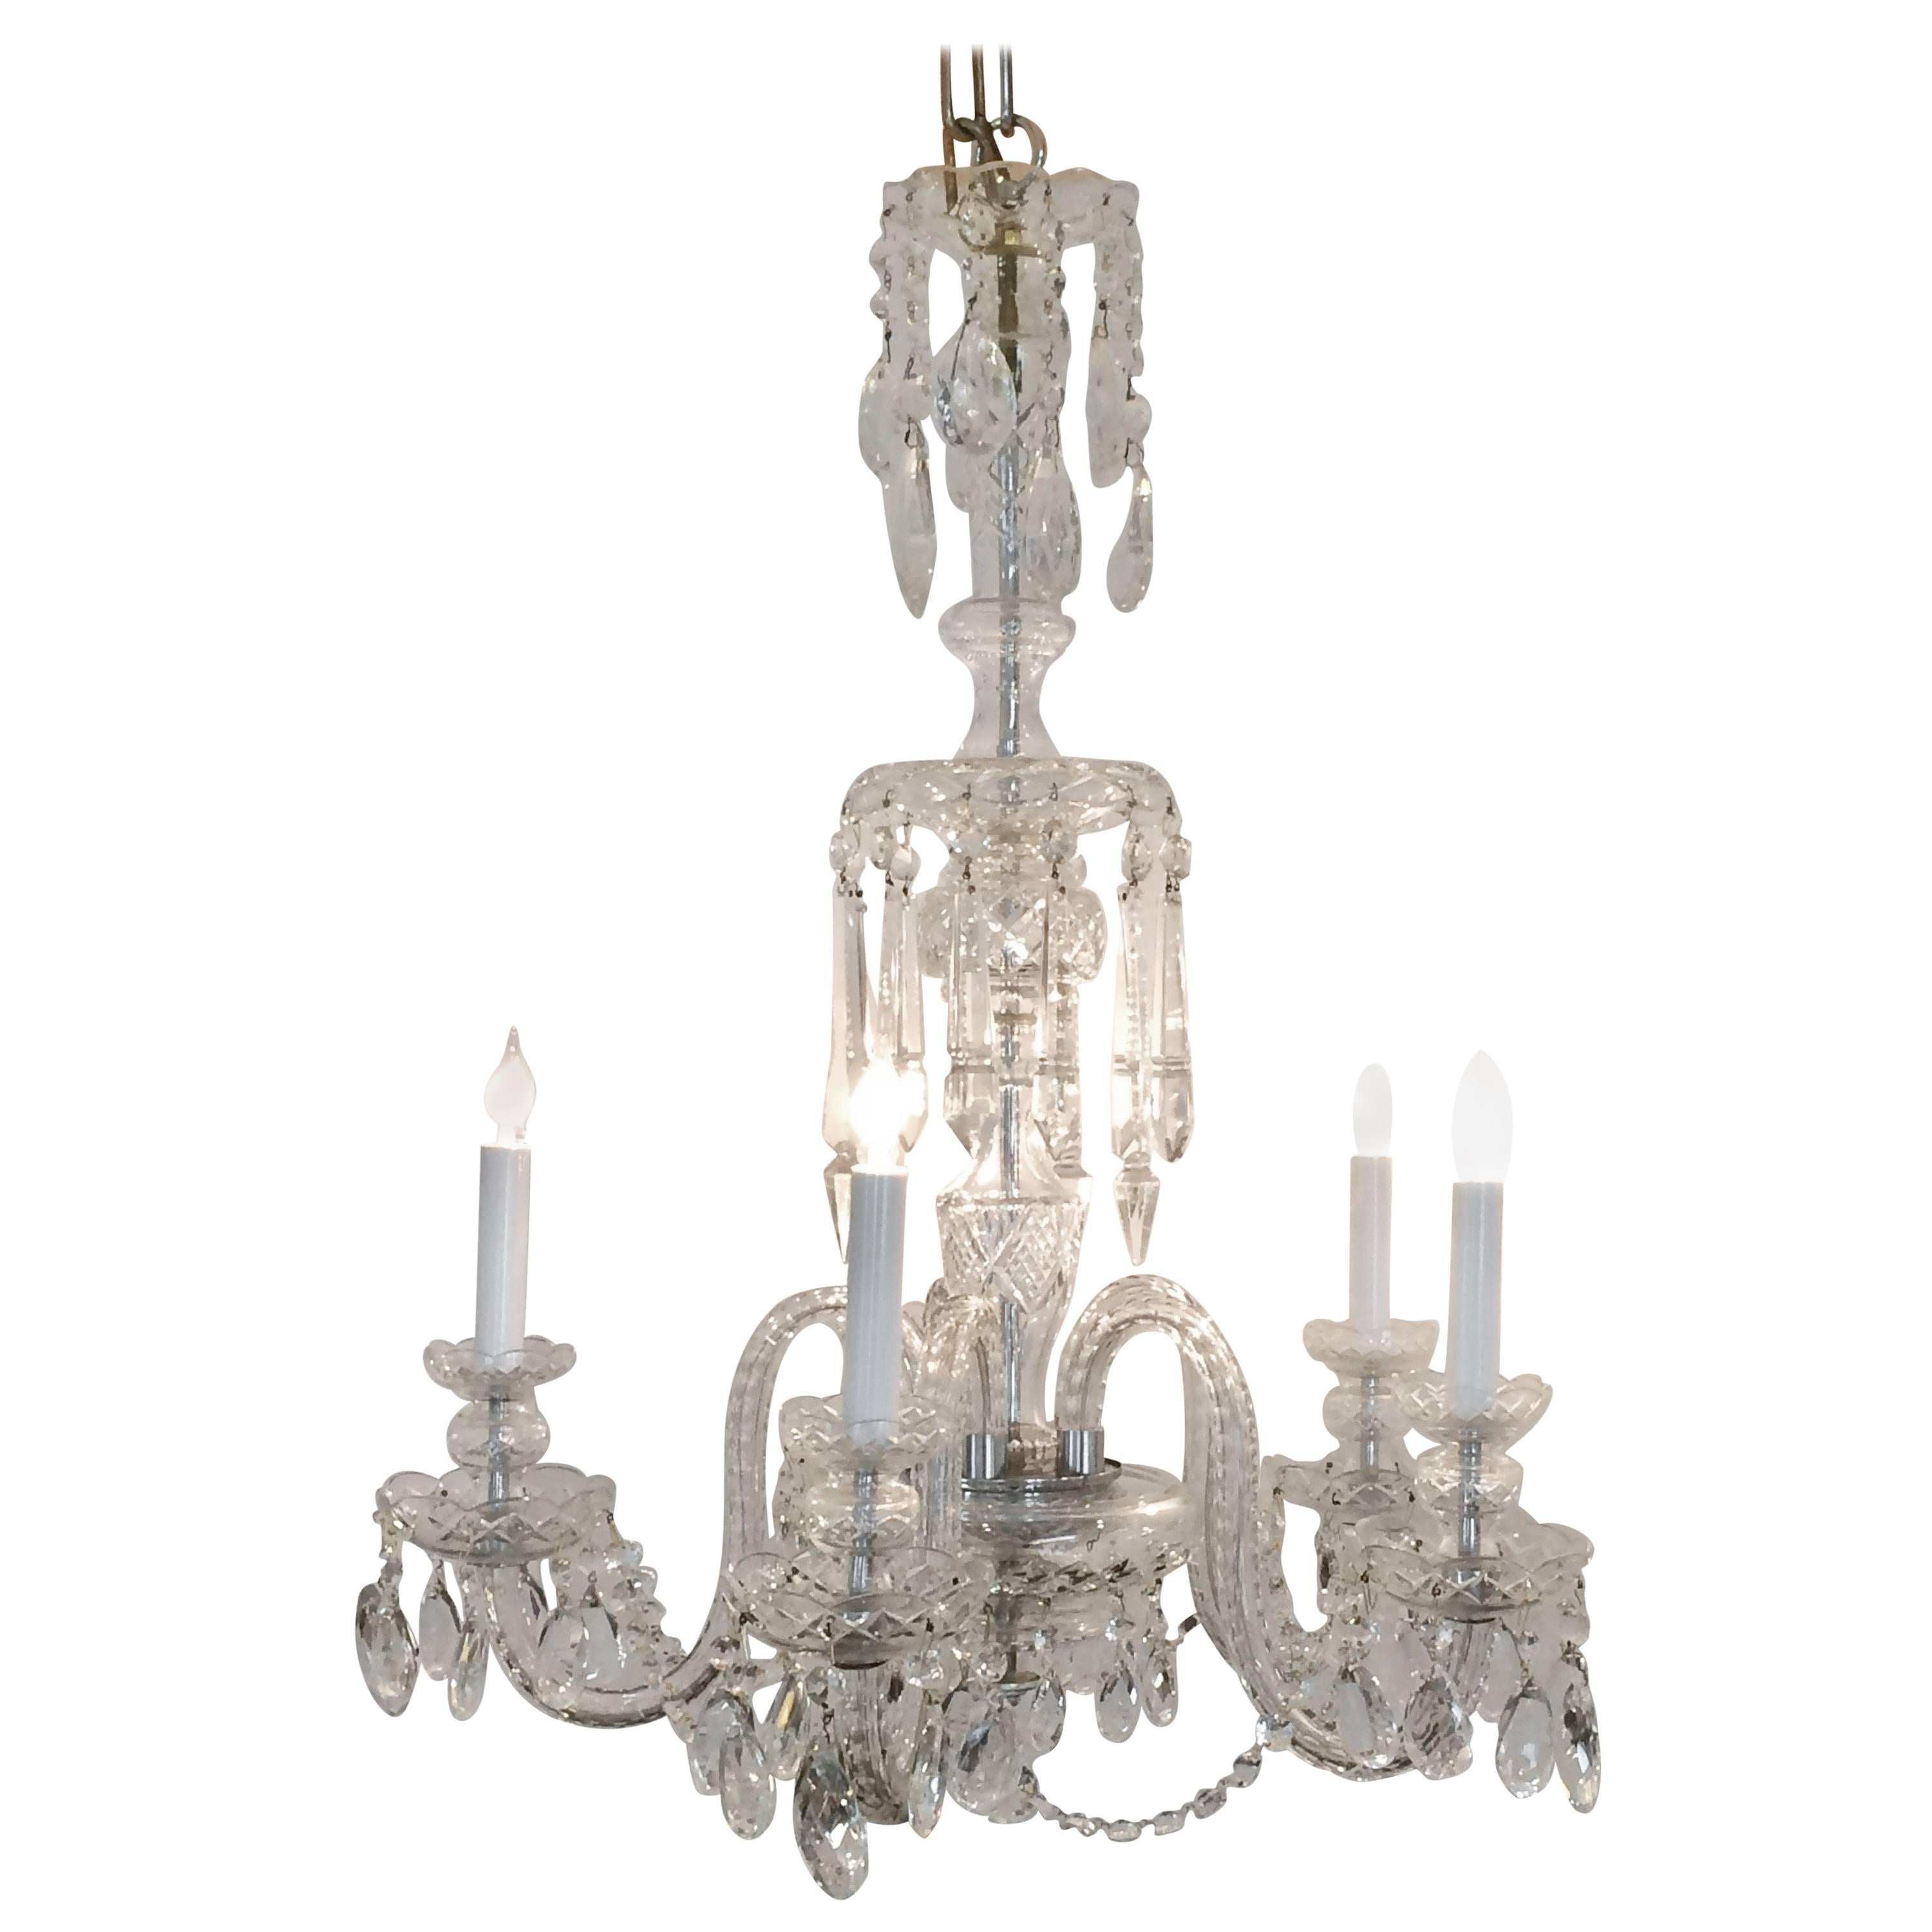 Very Elegant Classic Medium Sized French Crystal Chandelier For Sale